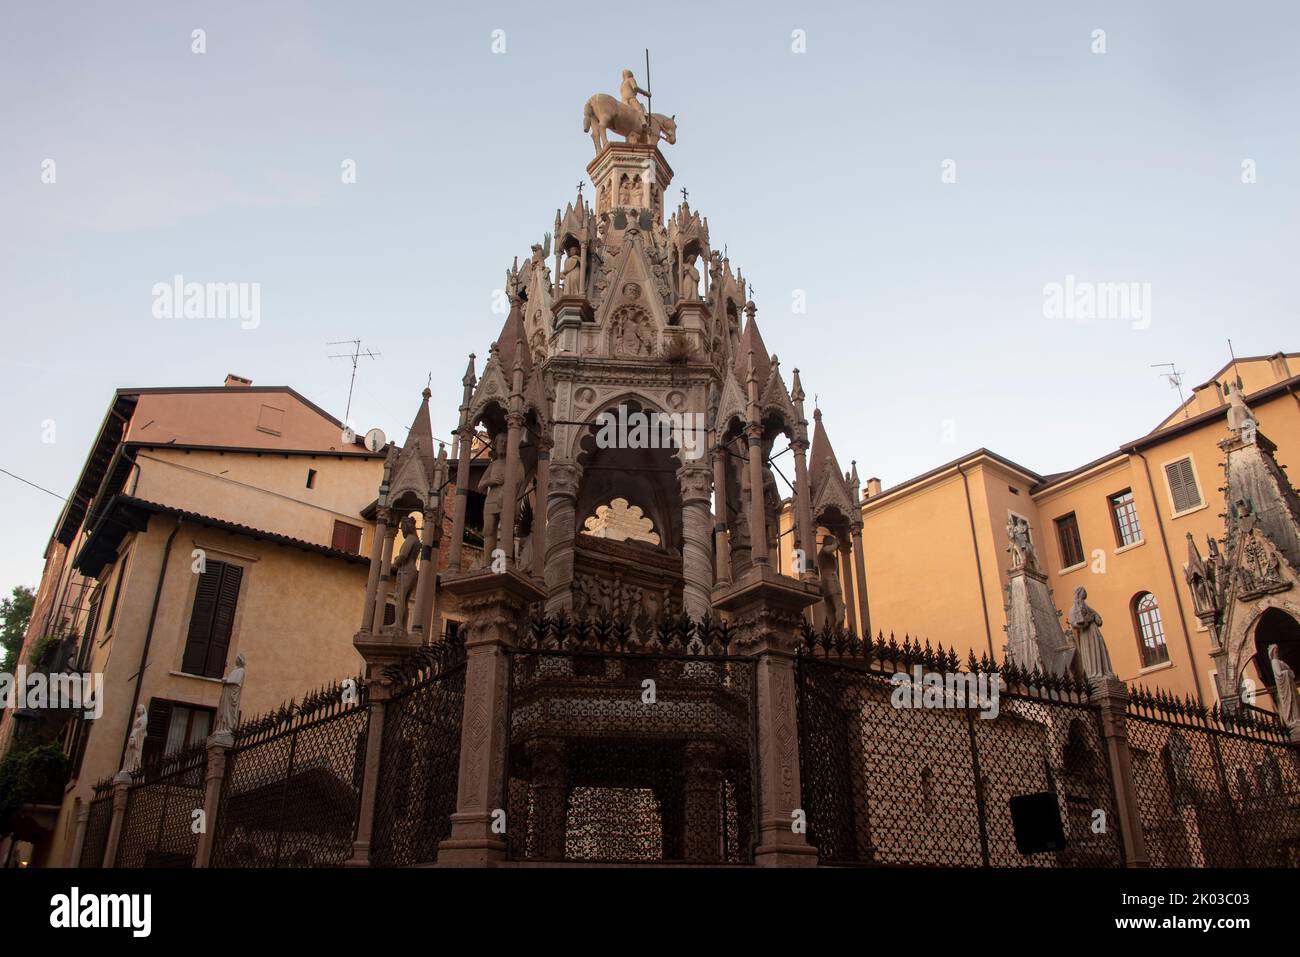 Scaliger tombs, Scaligers were the city lords of Verona, Veneto, Italy from 1260 to 1387. Stock Photo